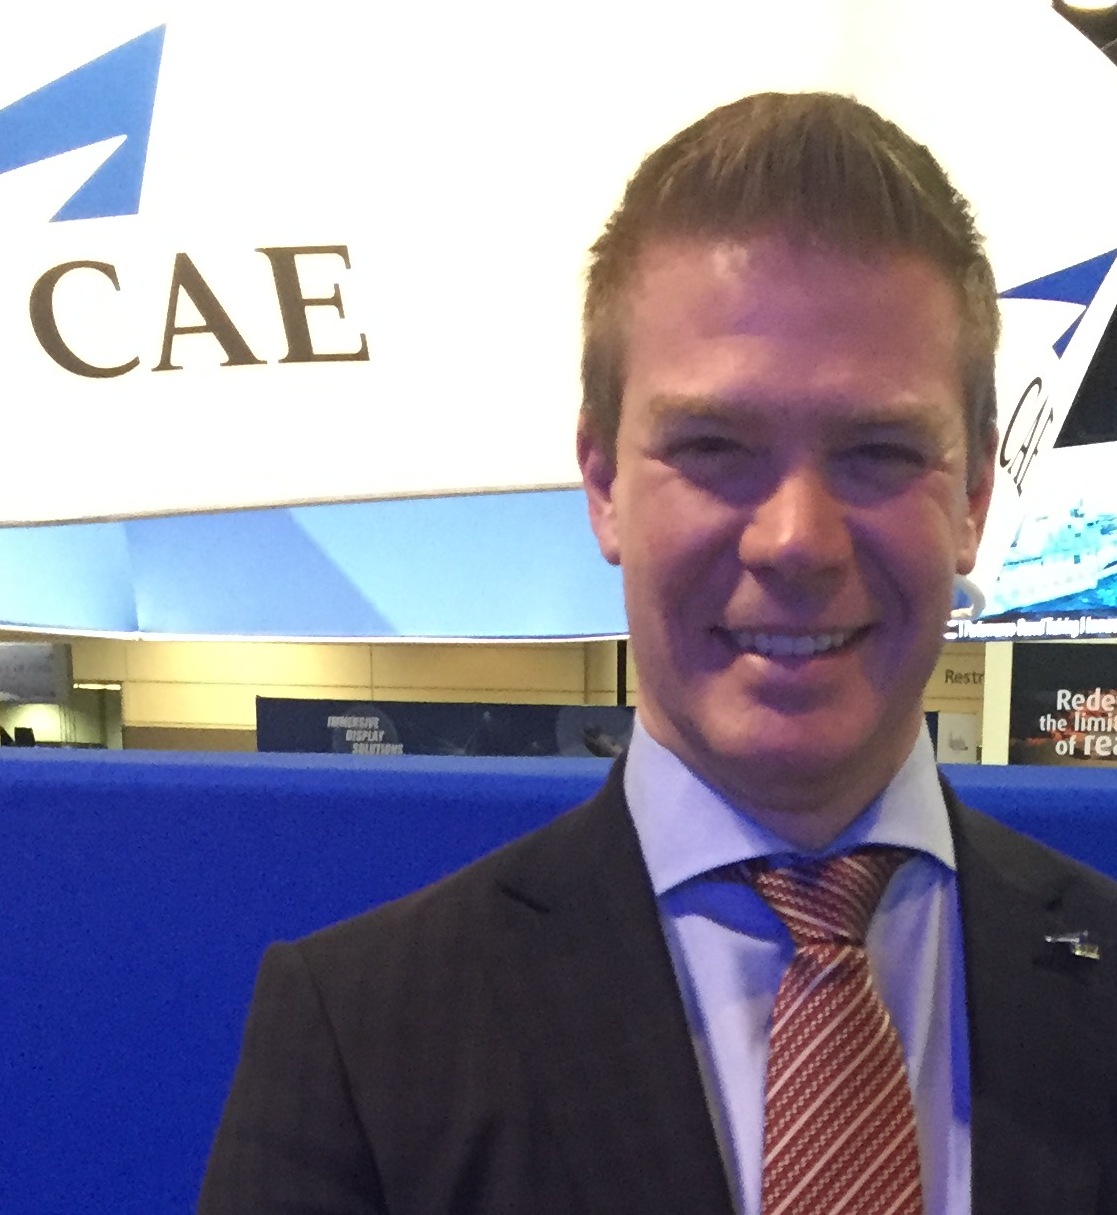 Joe Armstrong is now VP and General Manager at CAE Canada